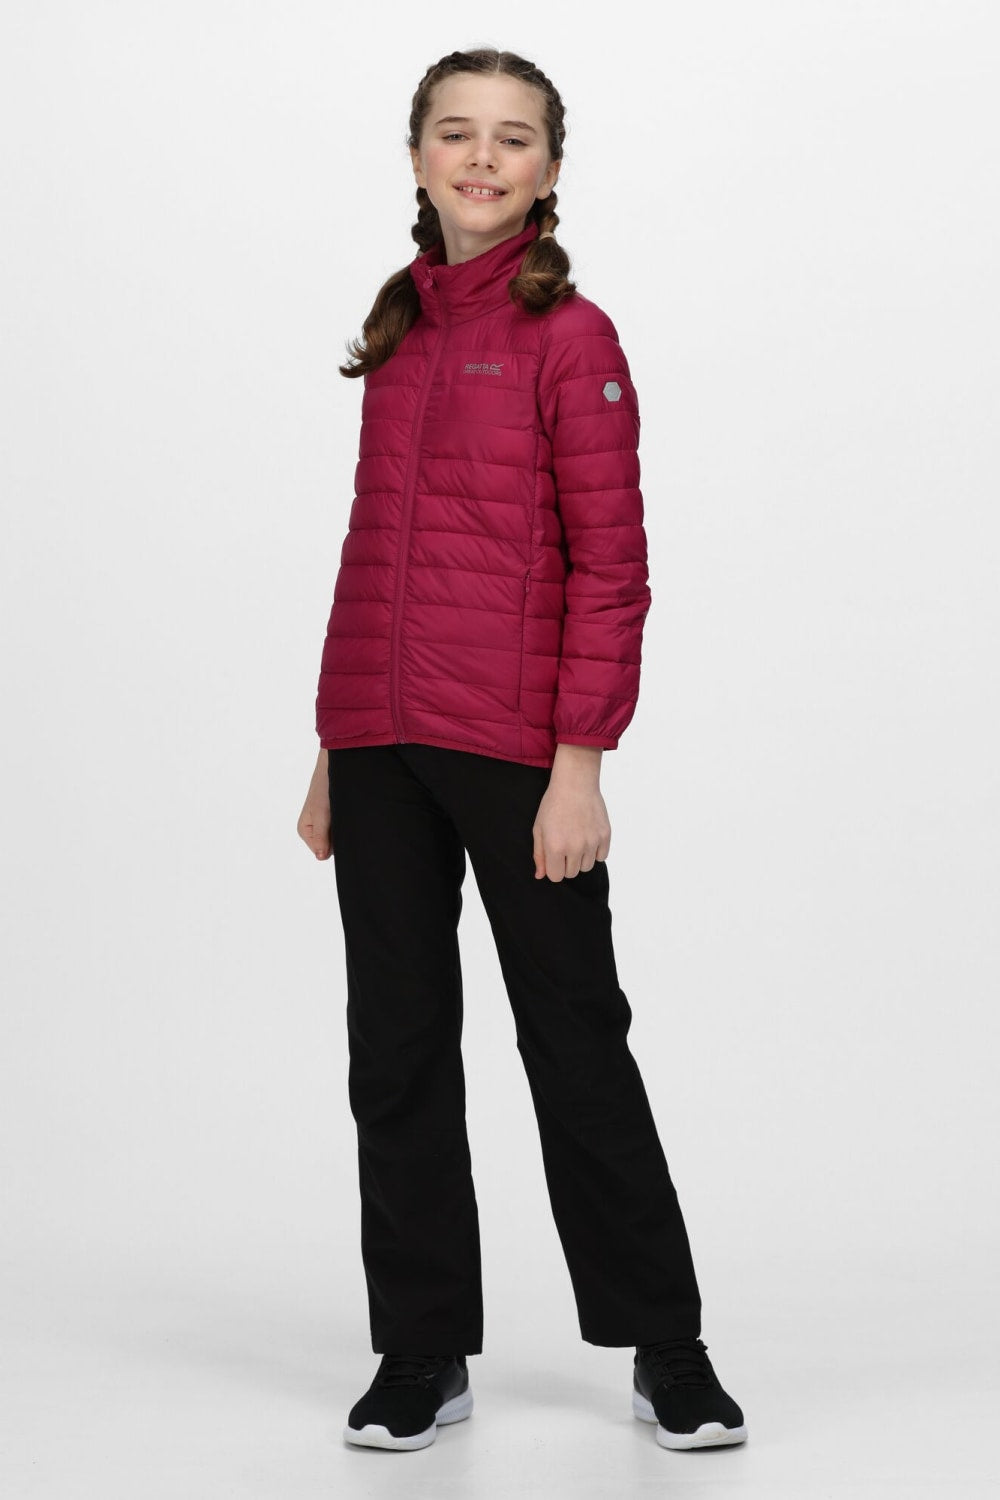 Childrens/Kids Hillpack Quilted Insulated Jacket - Raspberry Radience